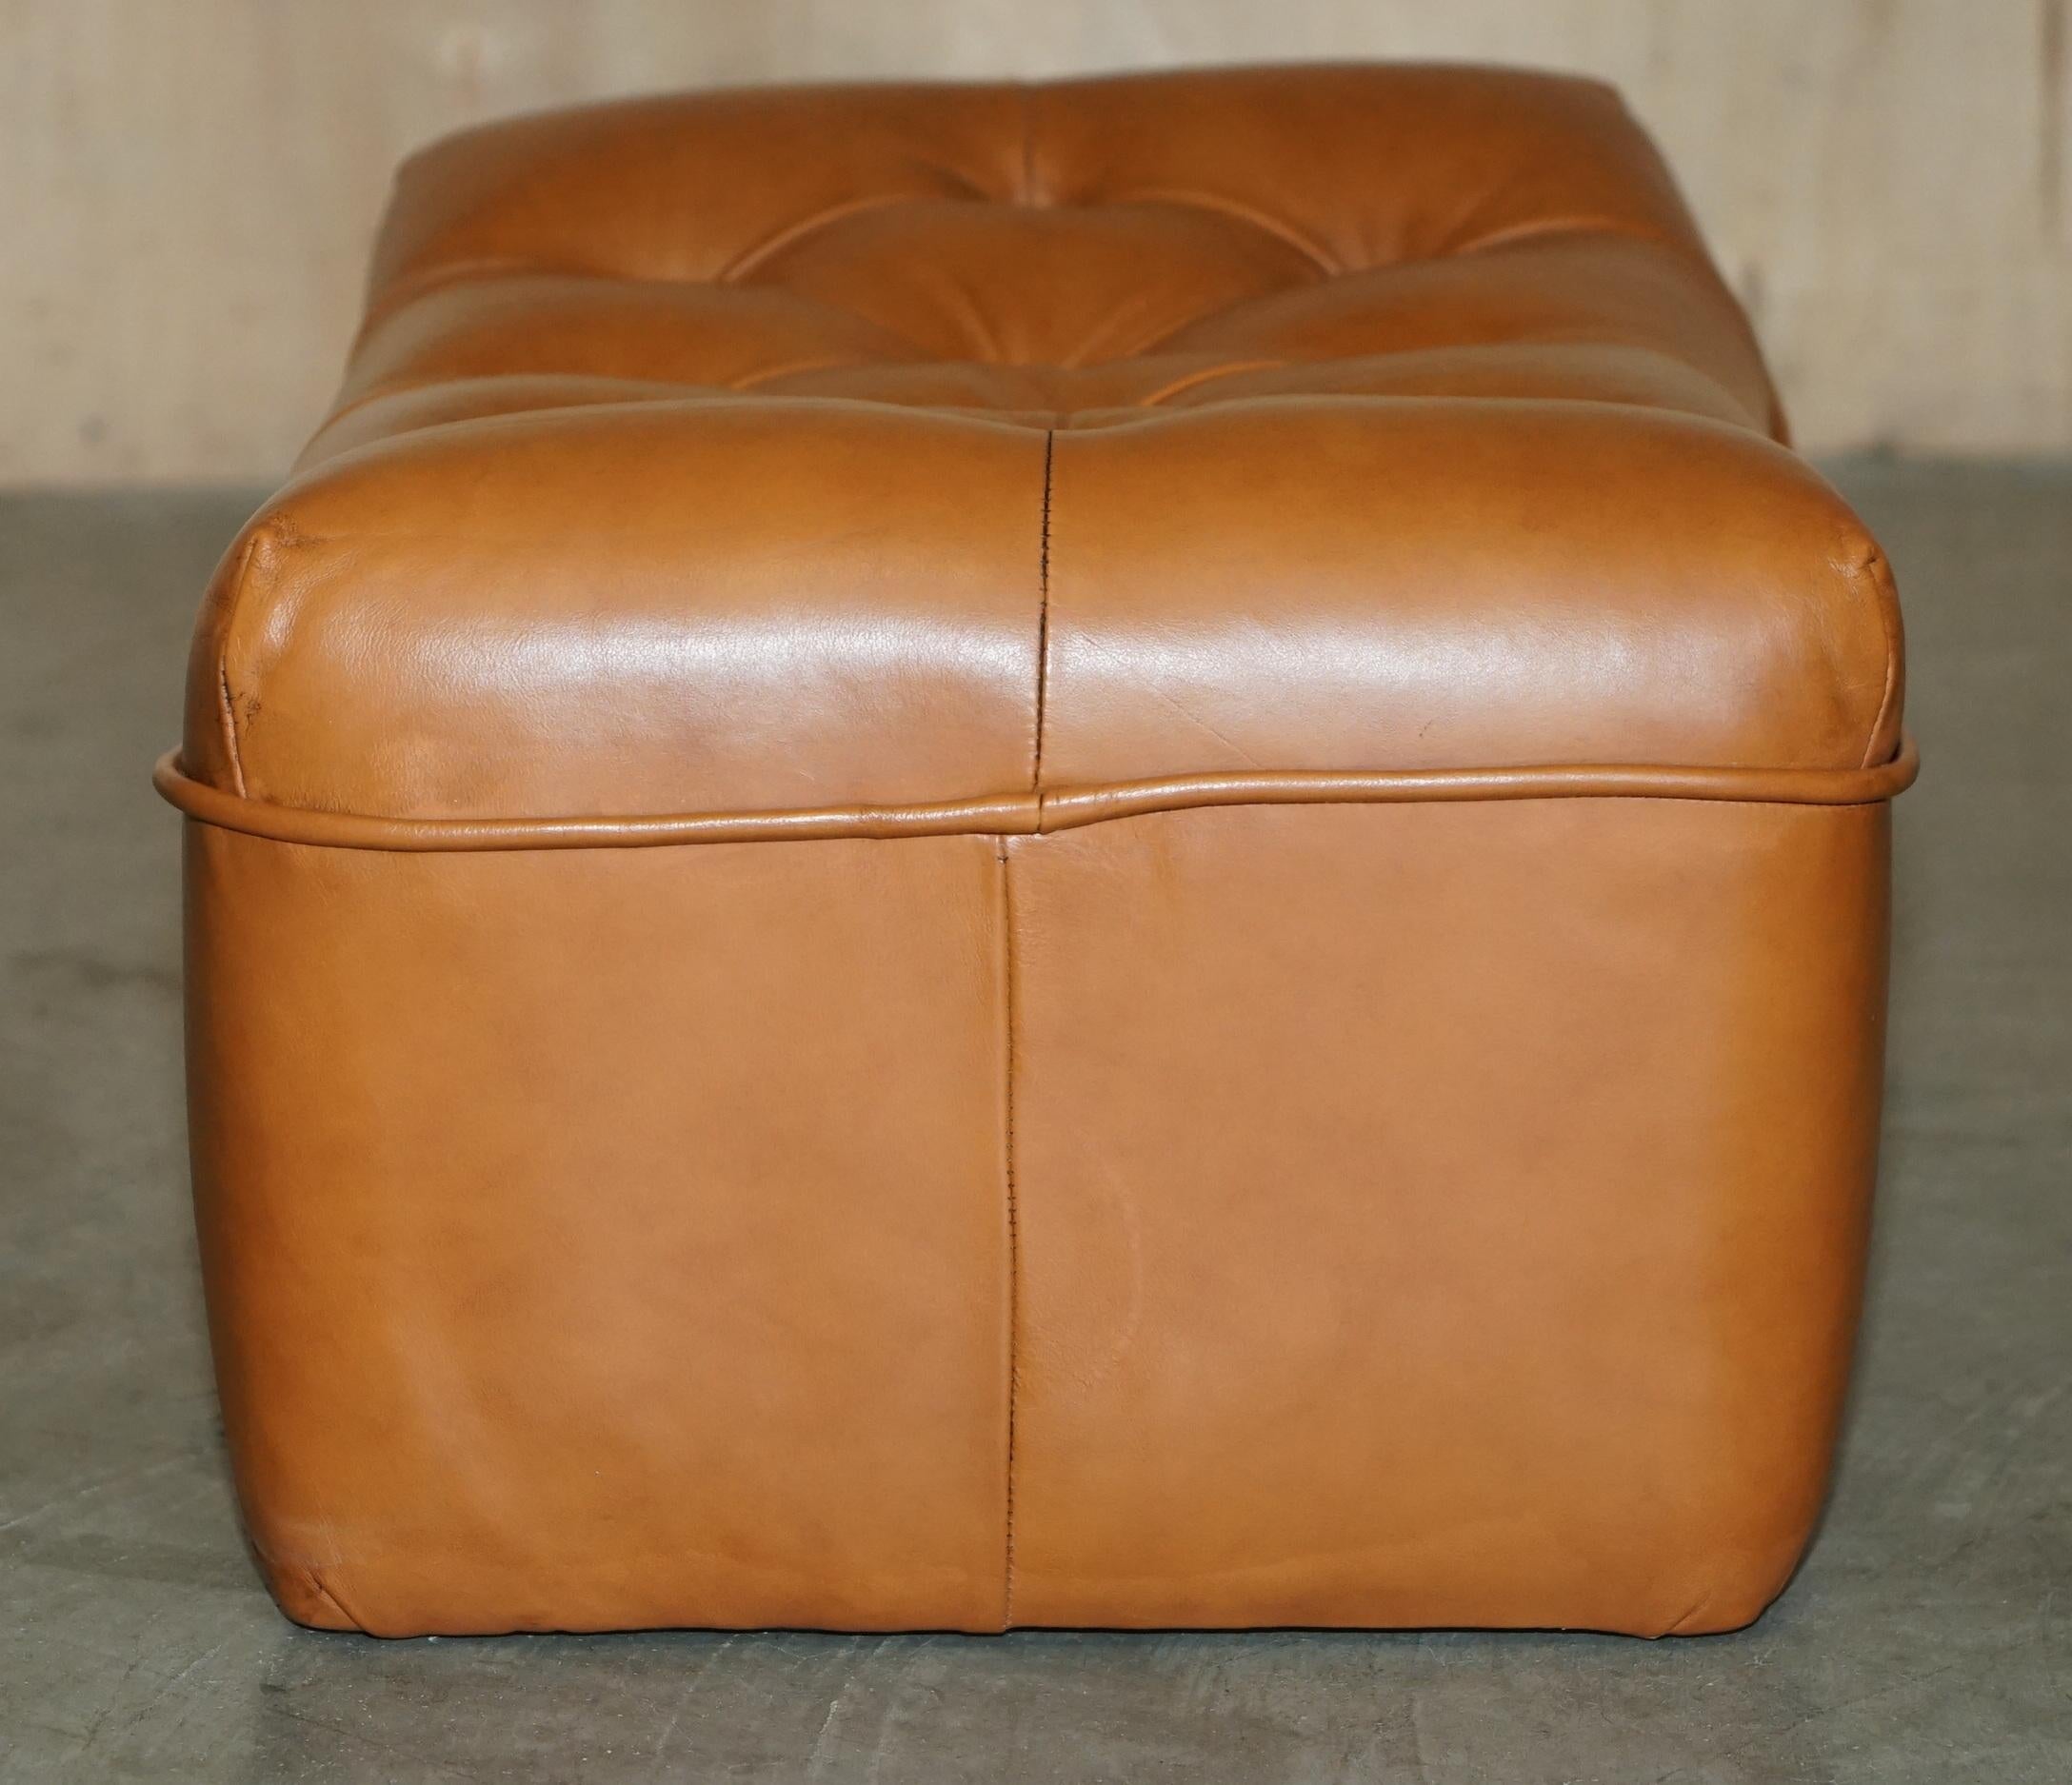 Leather FINE VINTAGE MiD CENTURY MODERN TAN BROWN LEATHER CHESTERFIELD TUFTED FOOTSTOOL